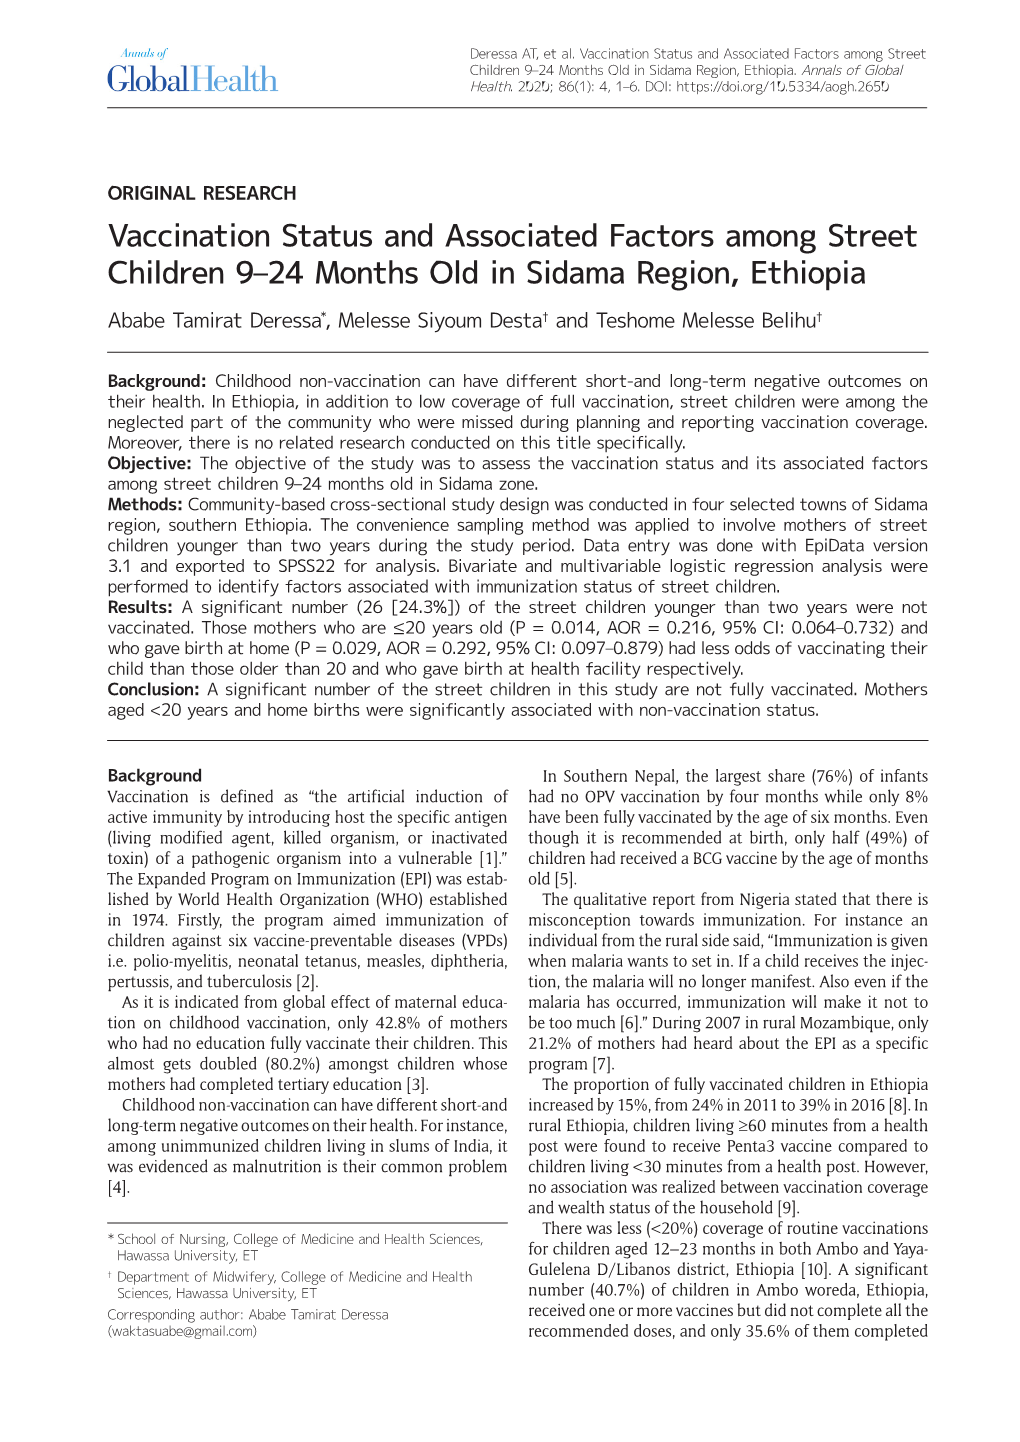 Vaccination Status and Associated Factors Among Street Children 9–24 Months Old in Sidama Region, Ethiopia